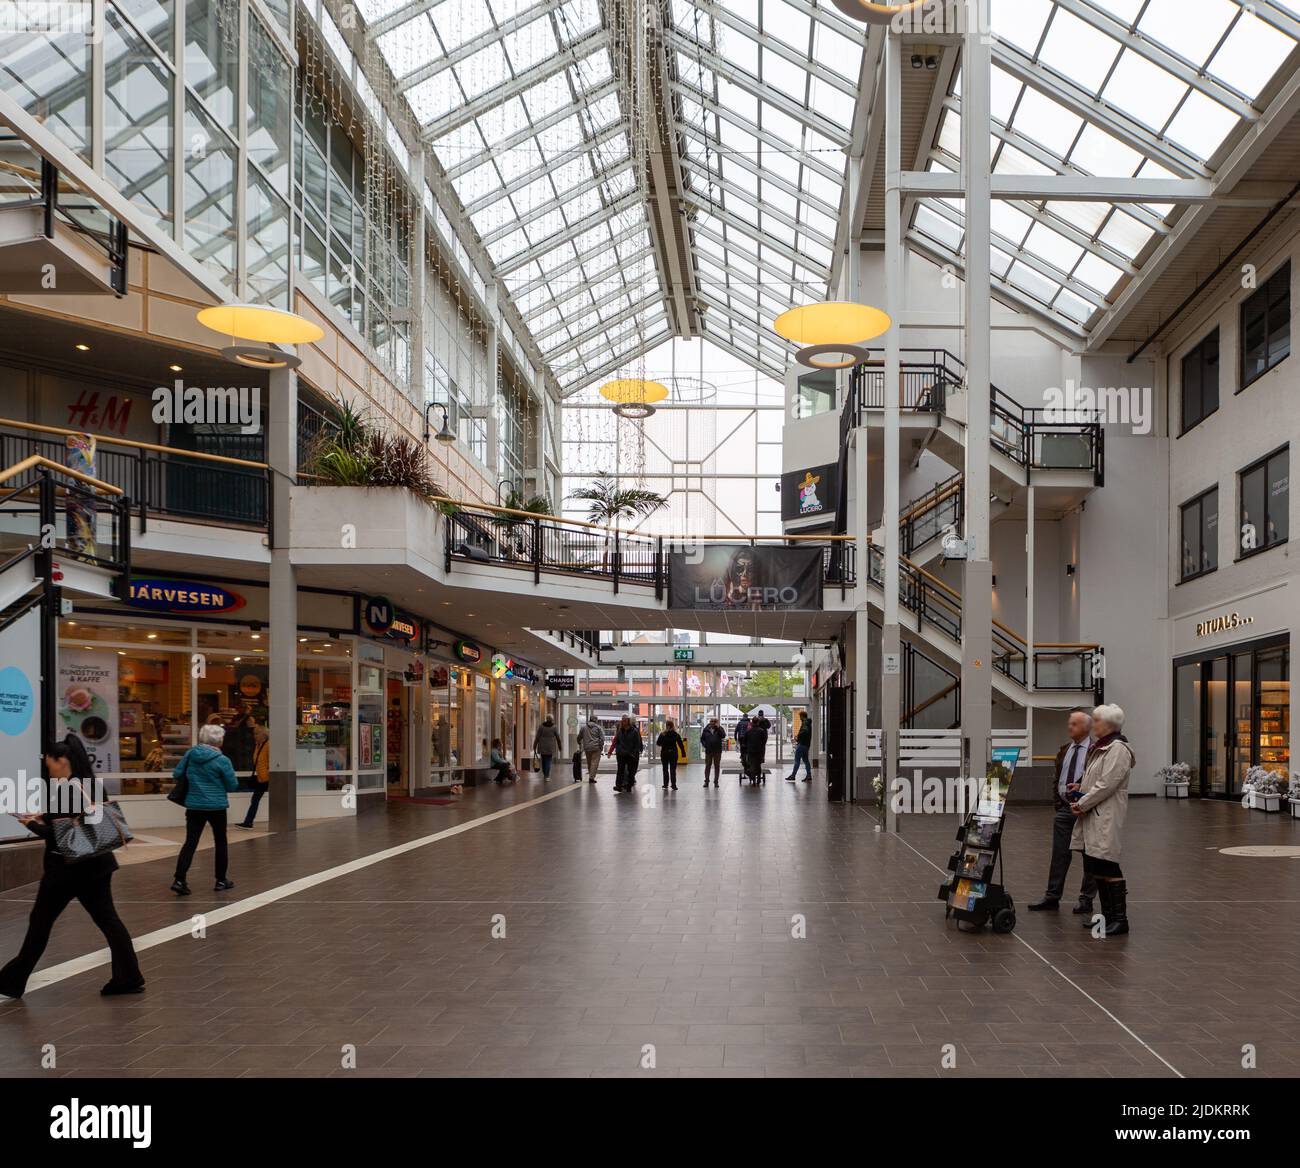 The overbuilt main street in Bodø, Norway. Houses cinema, shopping center  and stores Stock Photo - Alamy